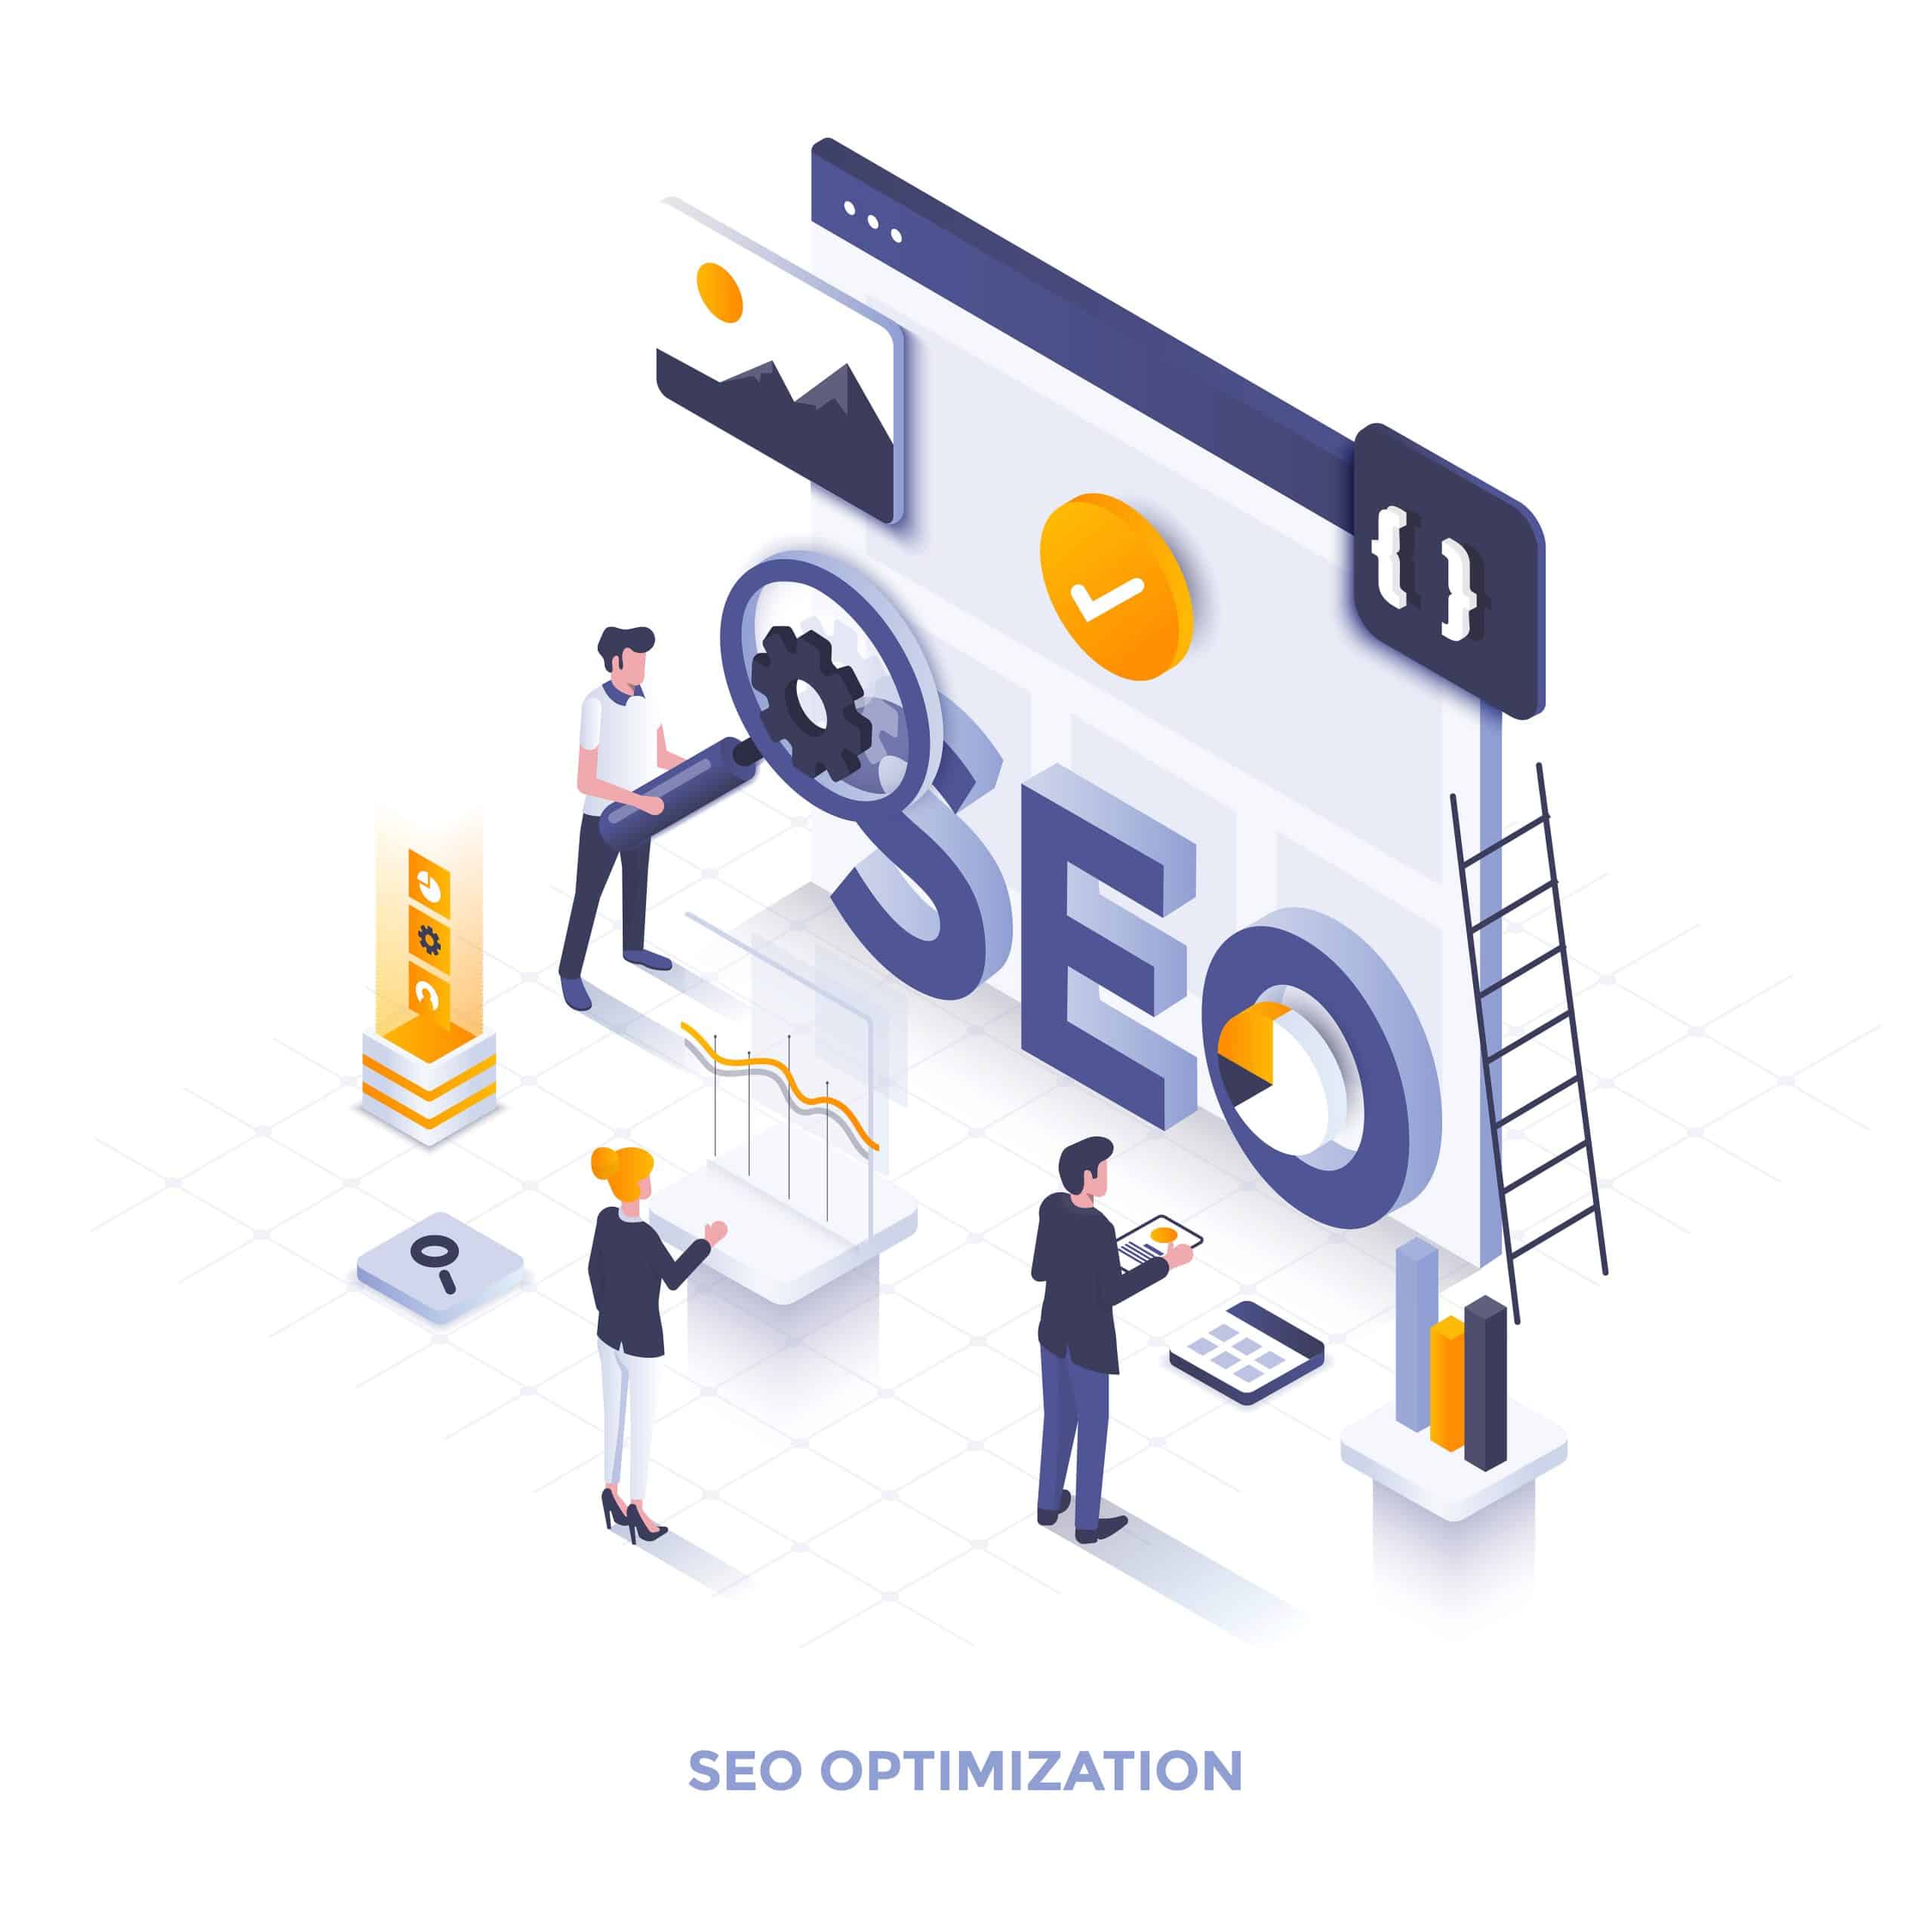 On site SEO is a complicated topic, so we put together a quick guide for you!